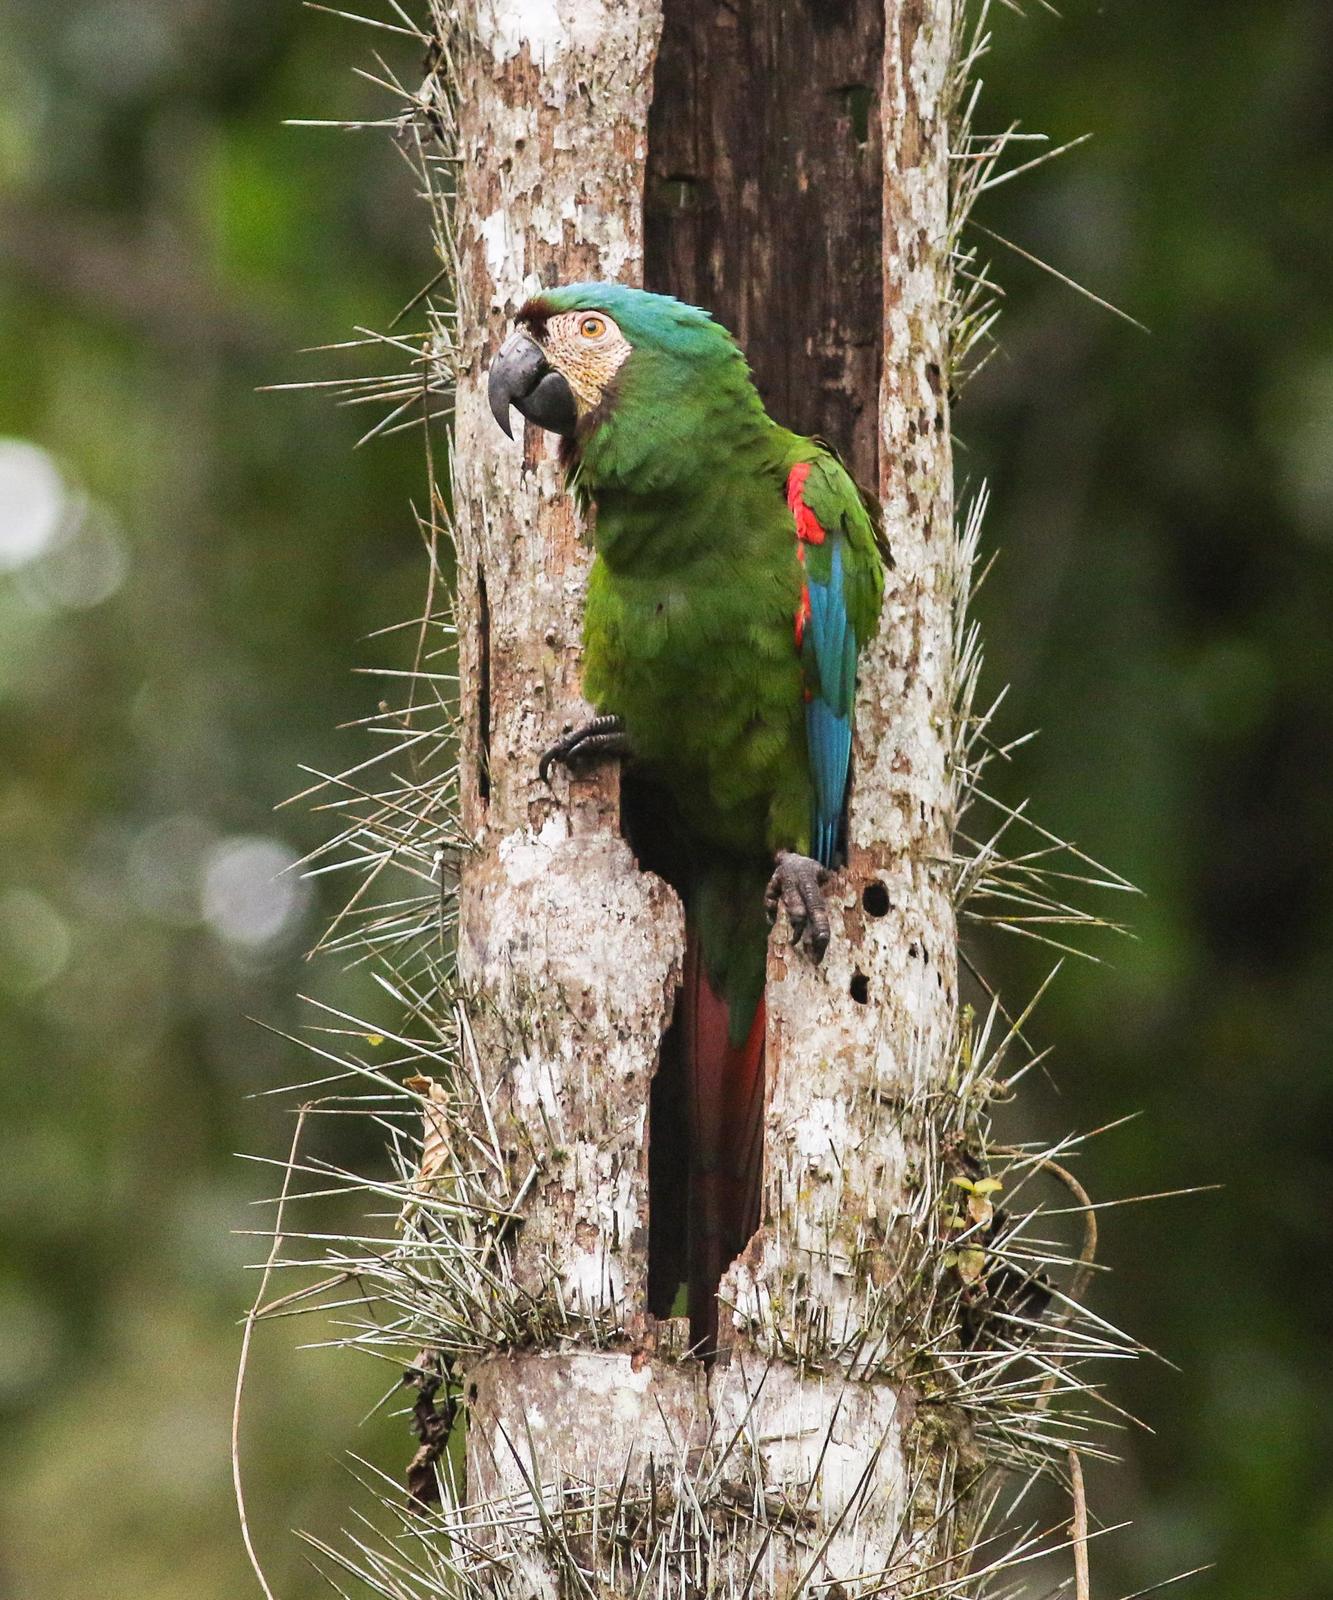 Chestnut-fronted Macaw Photo by Leonardo Garrigues